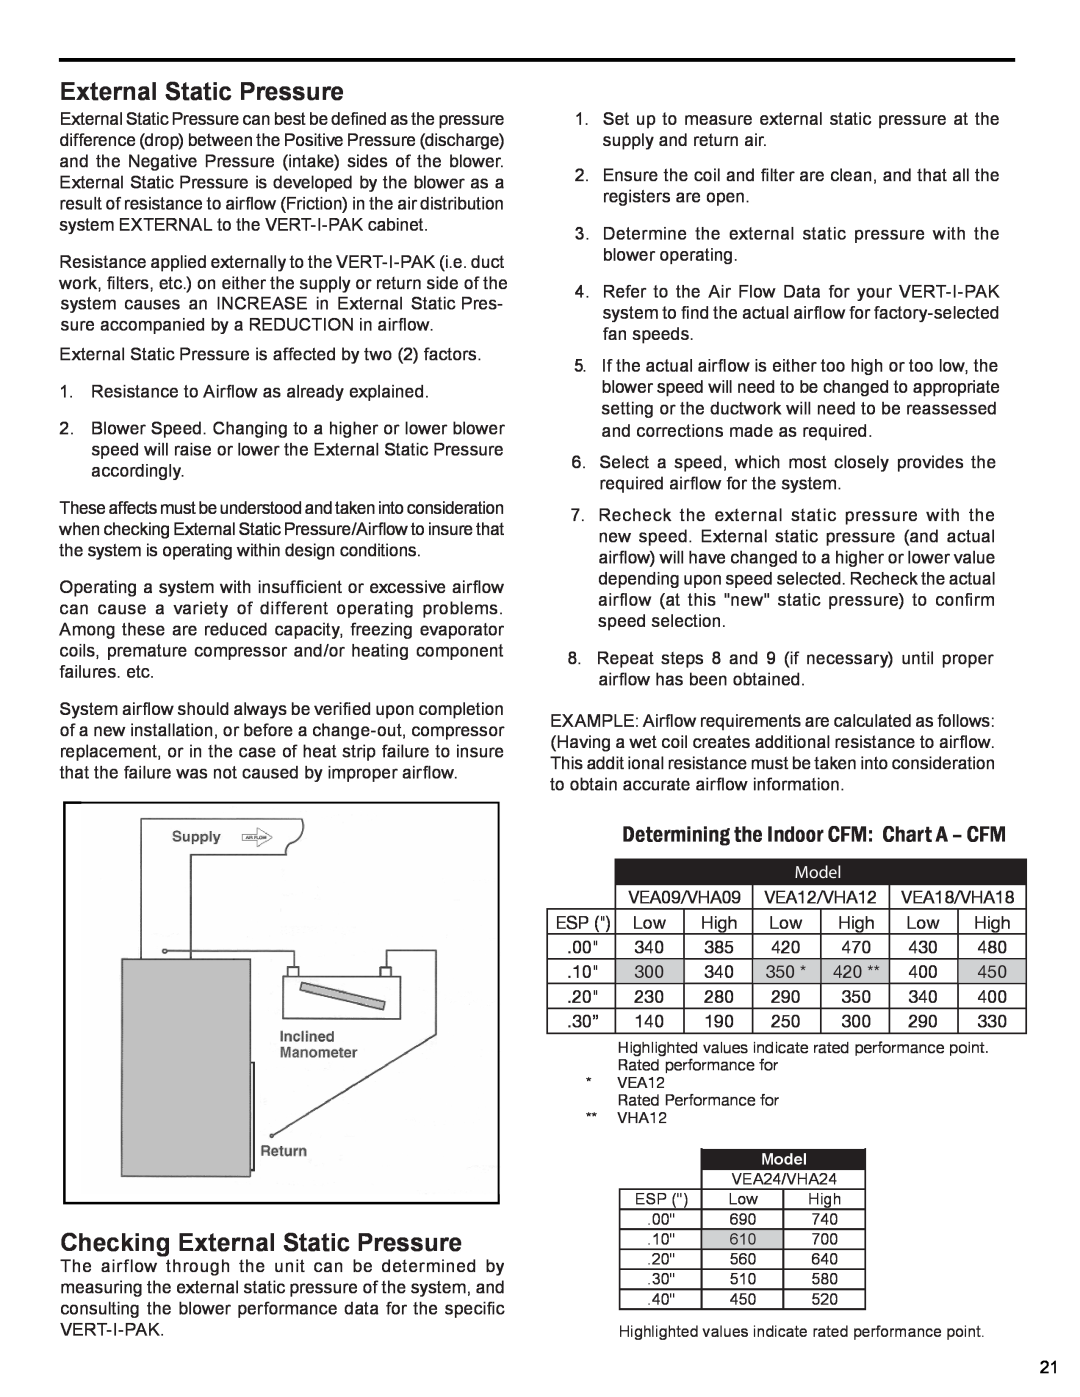 Friedrich R410A manual Checking External Static Pressure, Determining the Indoor CFM: Chart A – CFM 